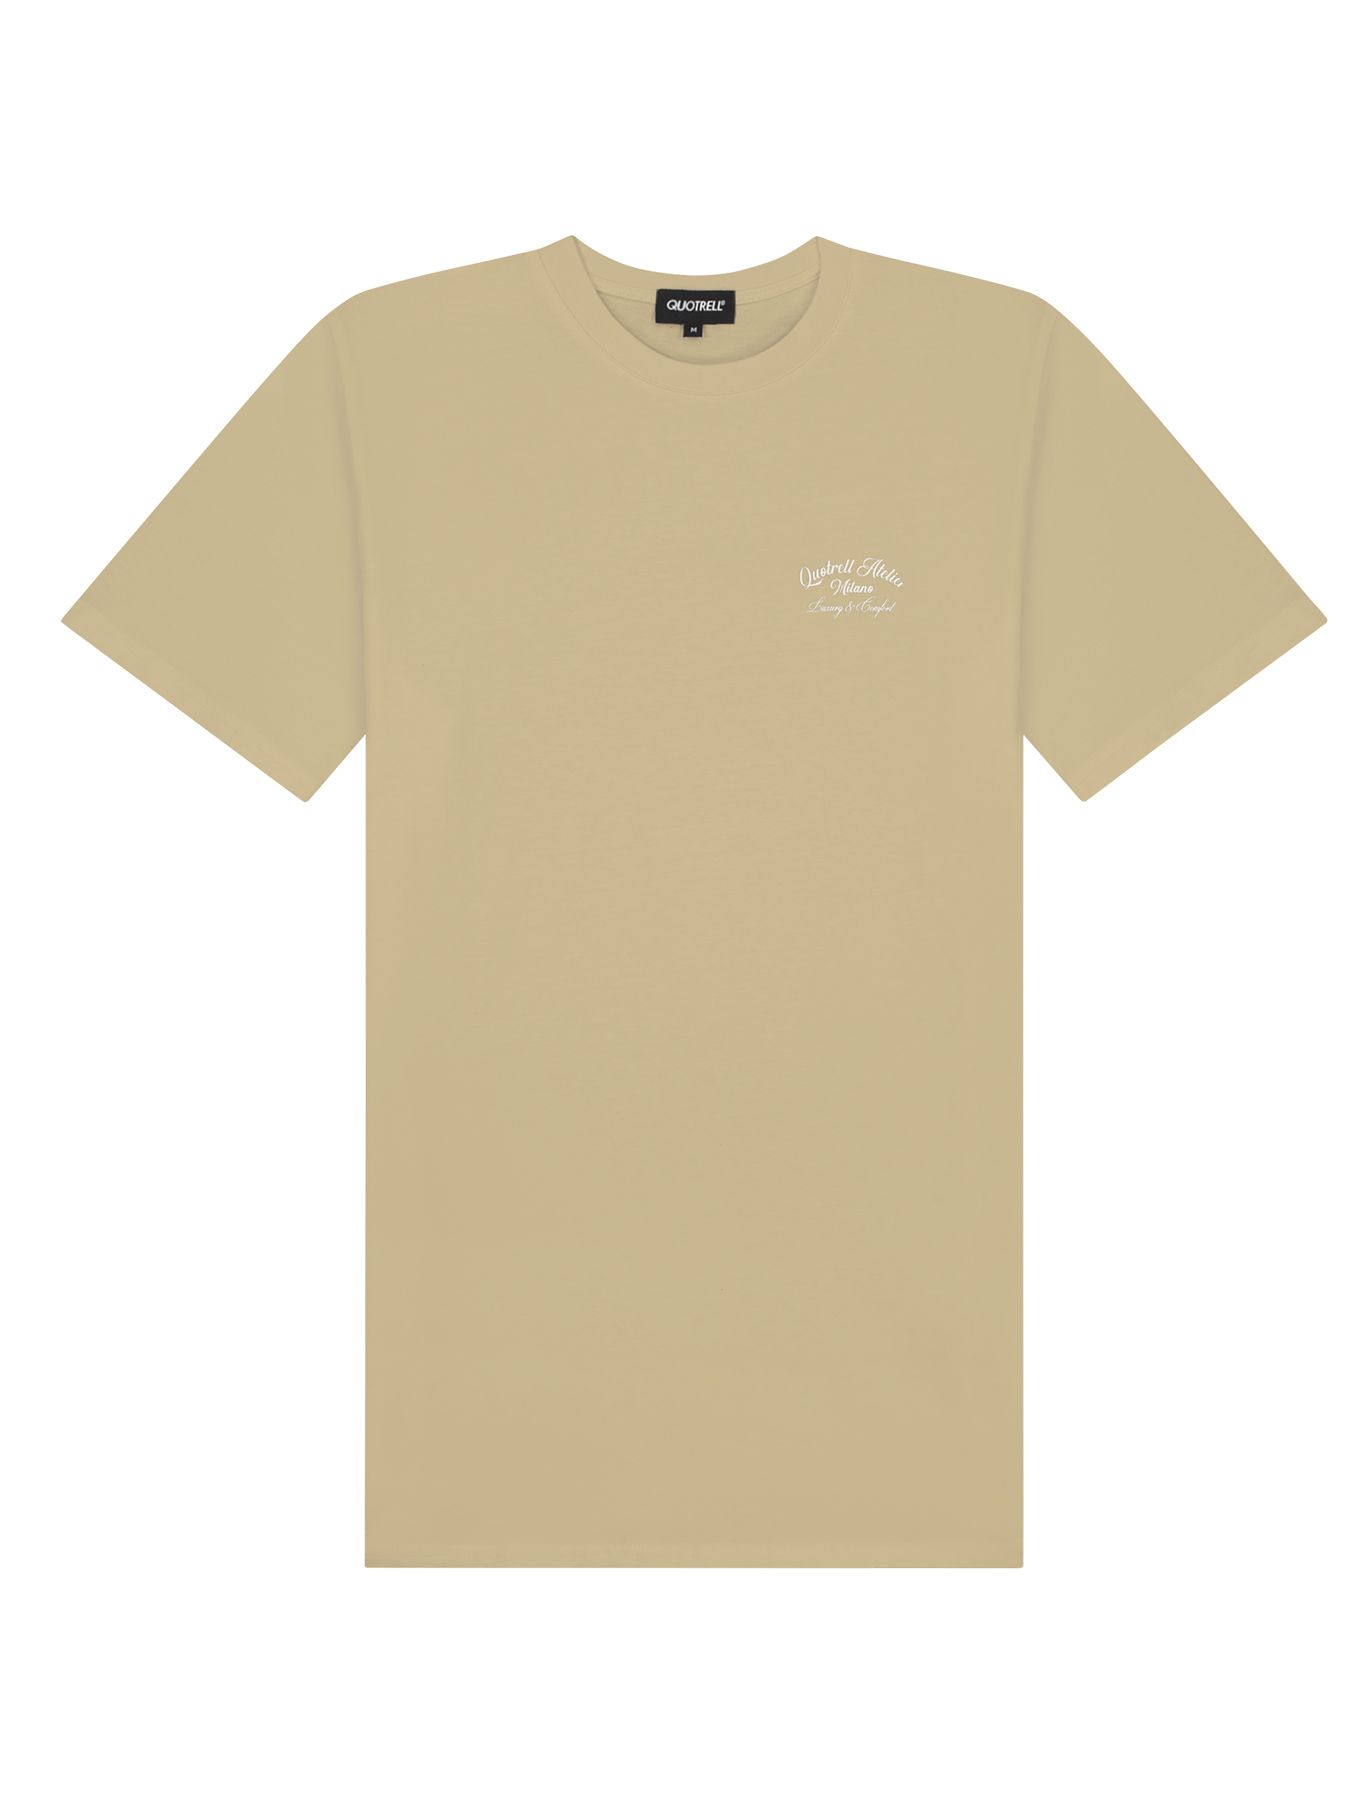 Quotrell Atelier milano t-shirt Beige 00107497-A3